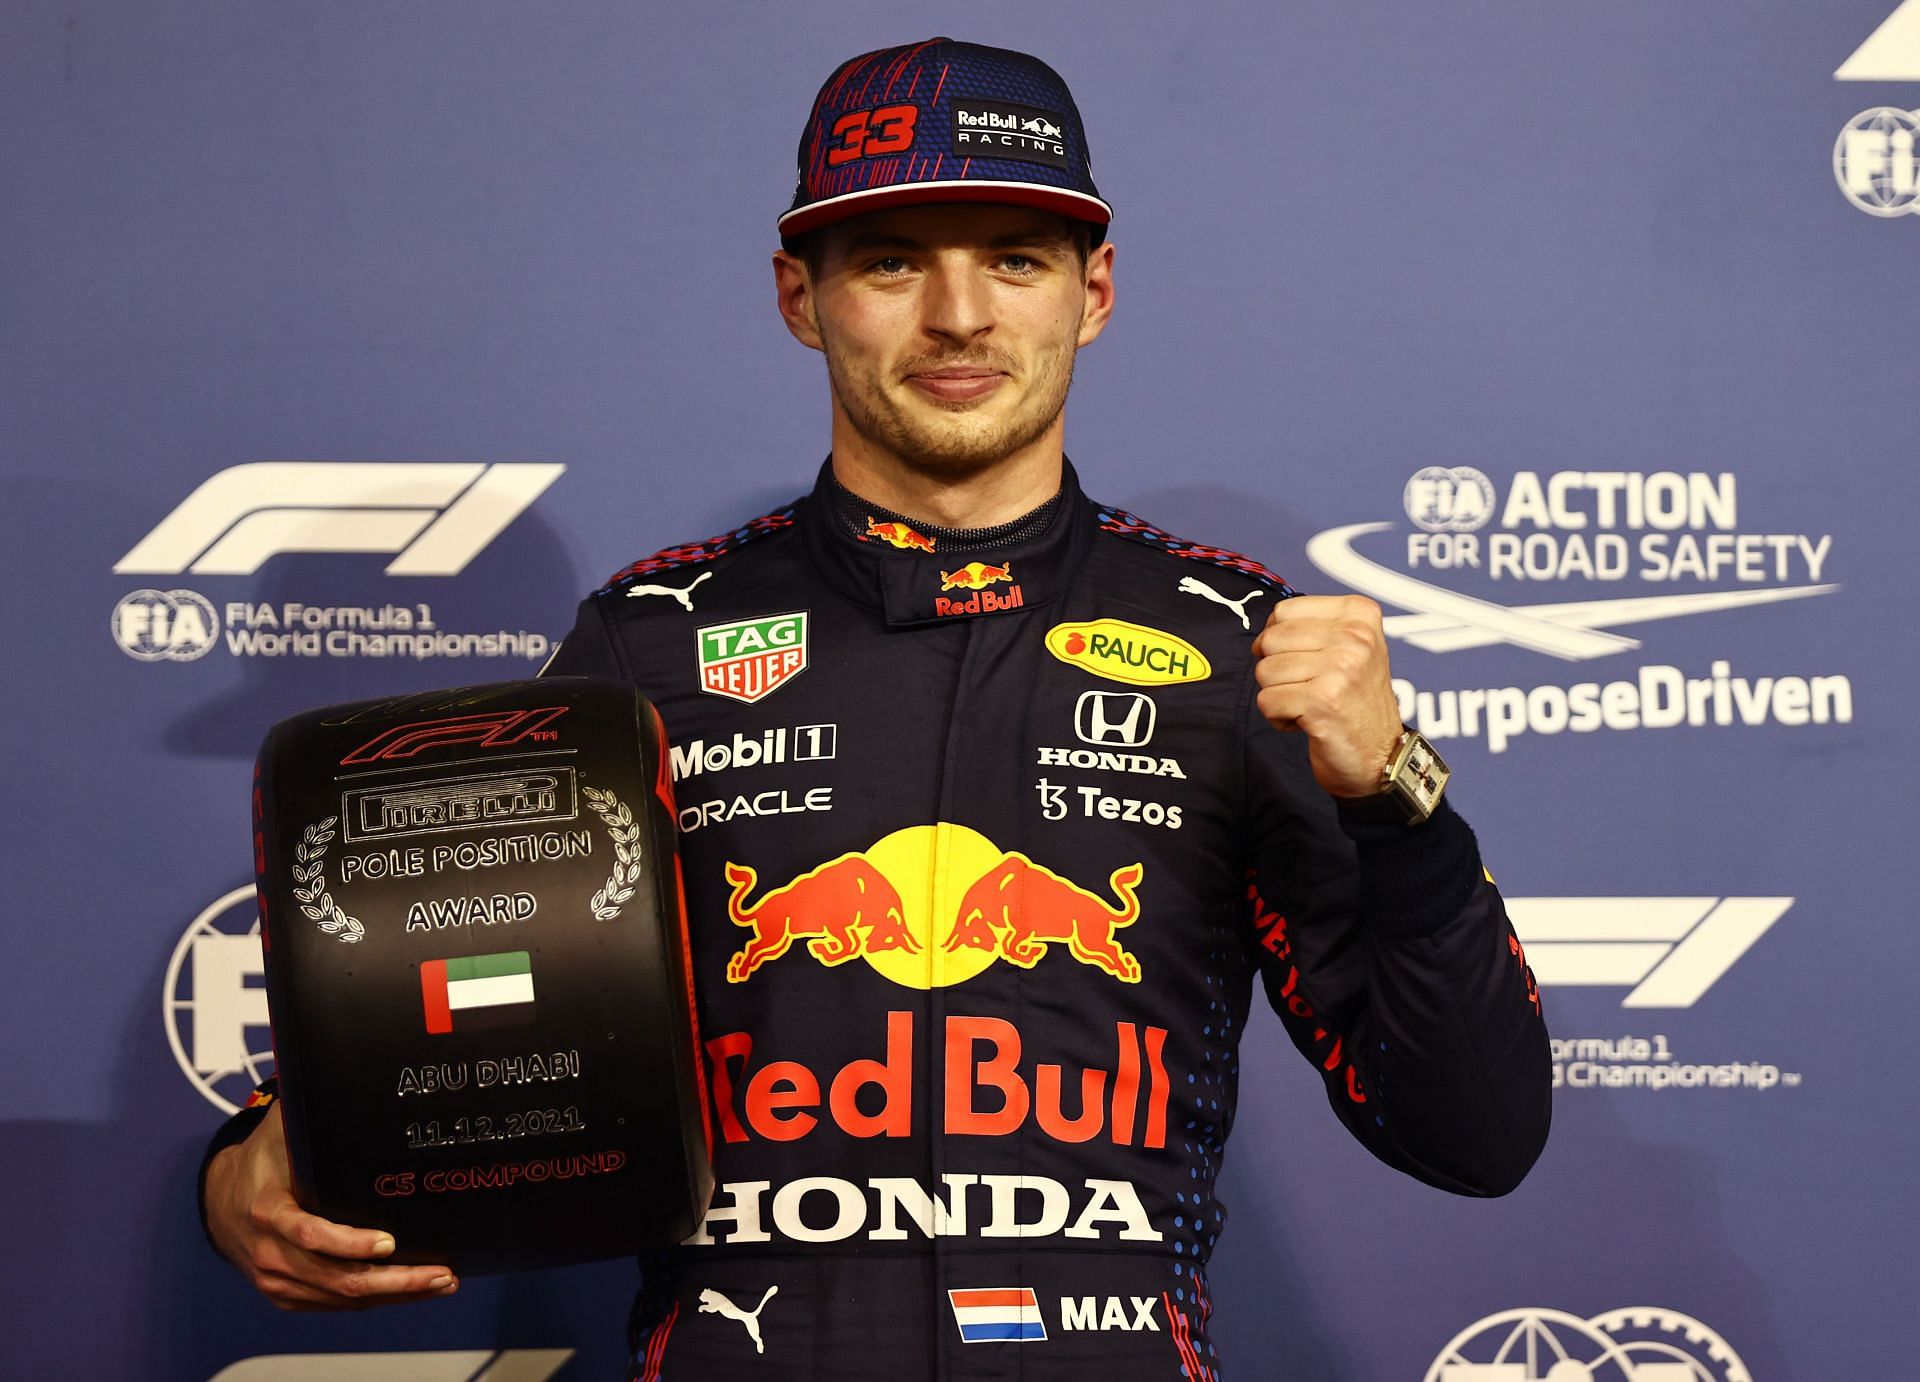 Max Verstappen clinched his 10th pole for the 2021 F1 season